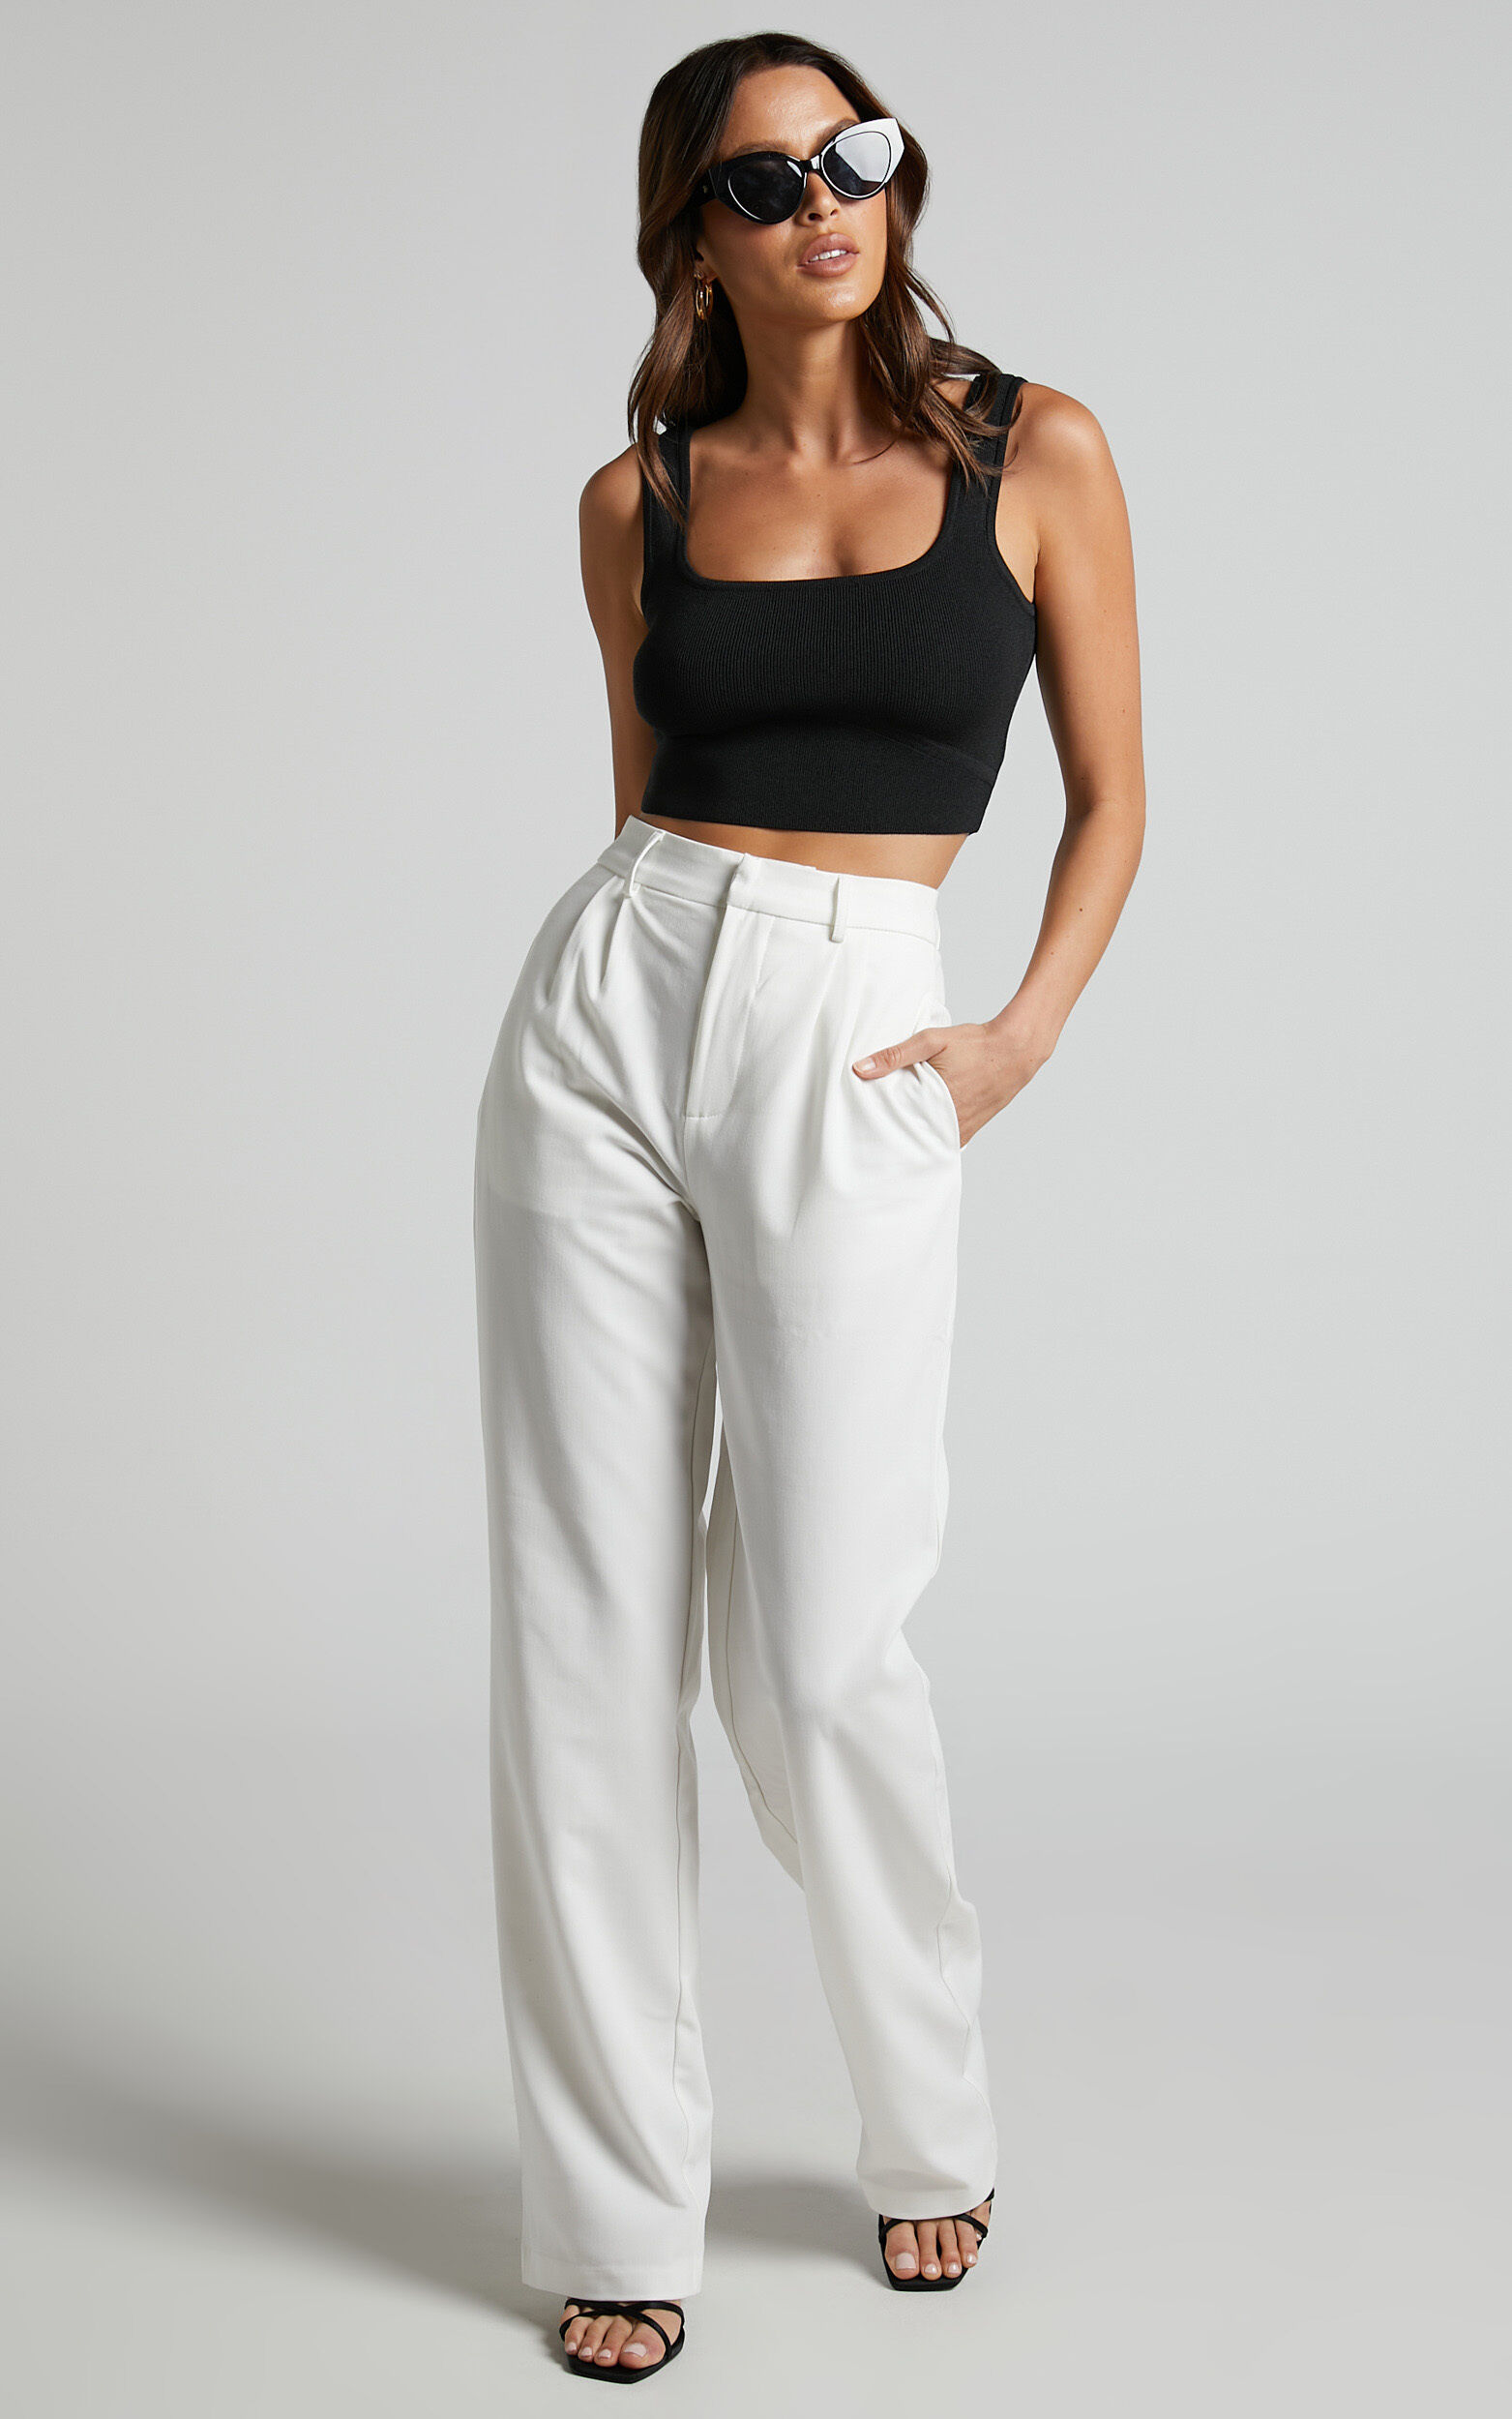 Lorcan Pants - High Waisted Tailored Pants in White - 04, WHT6